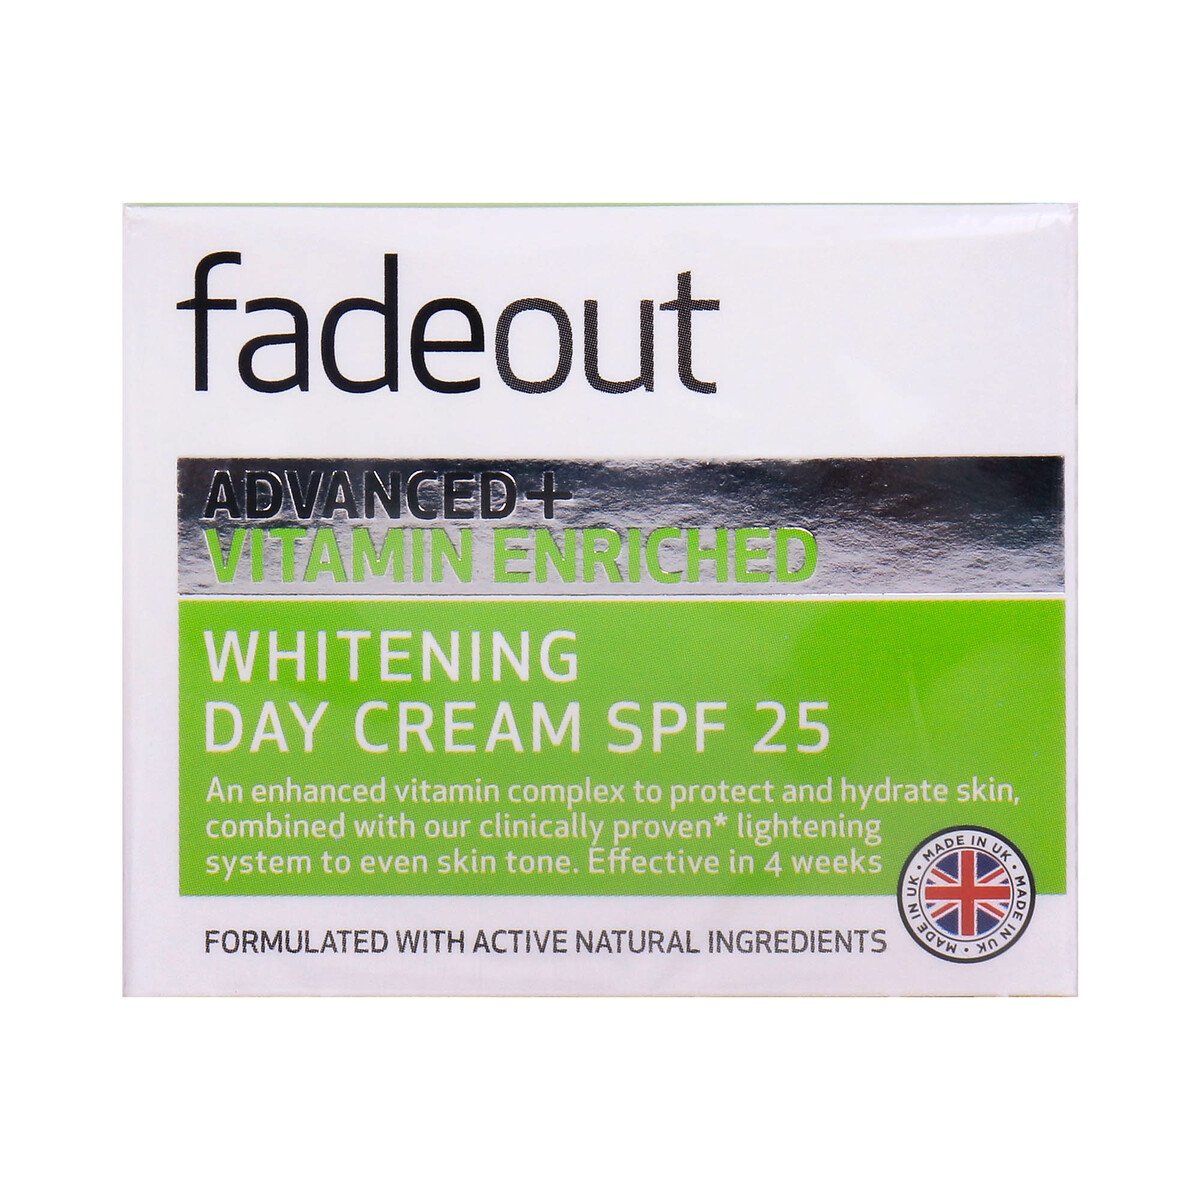 Fade Out Advanced+ Vitamin Enriched Whitening Day Cream SPF 25 50 ml